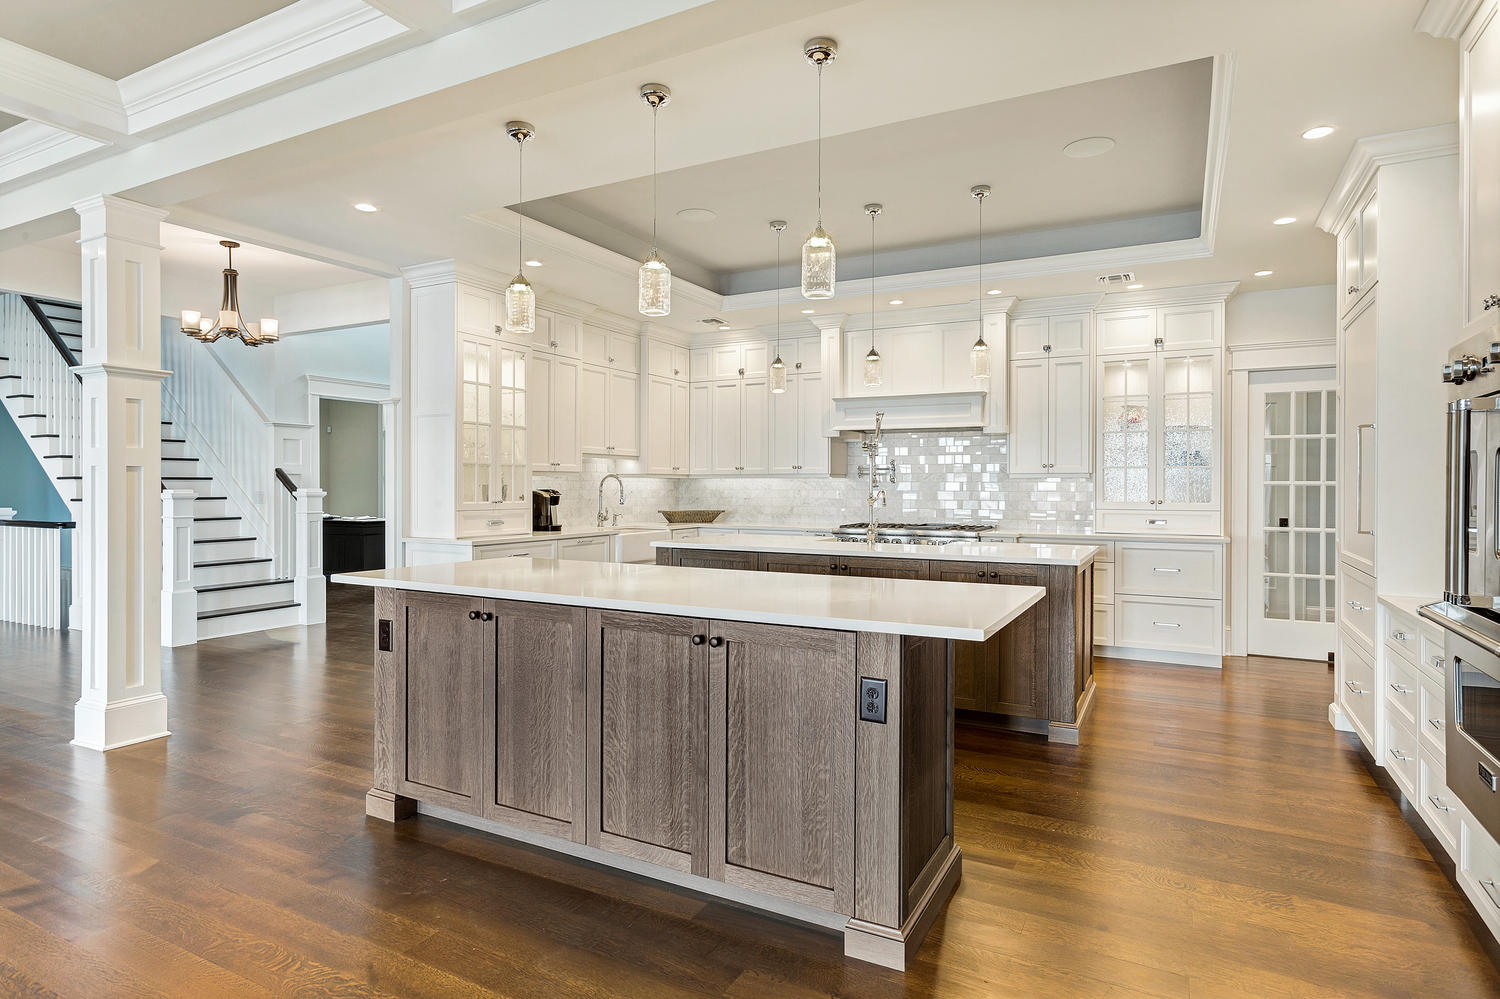 Costal Kitchen Concepts, Image Gallery